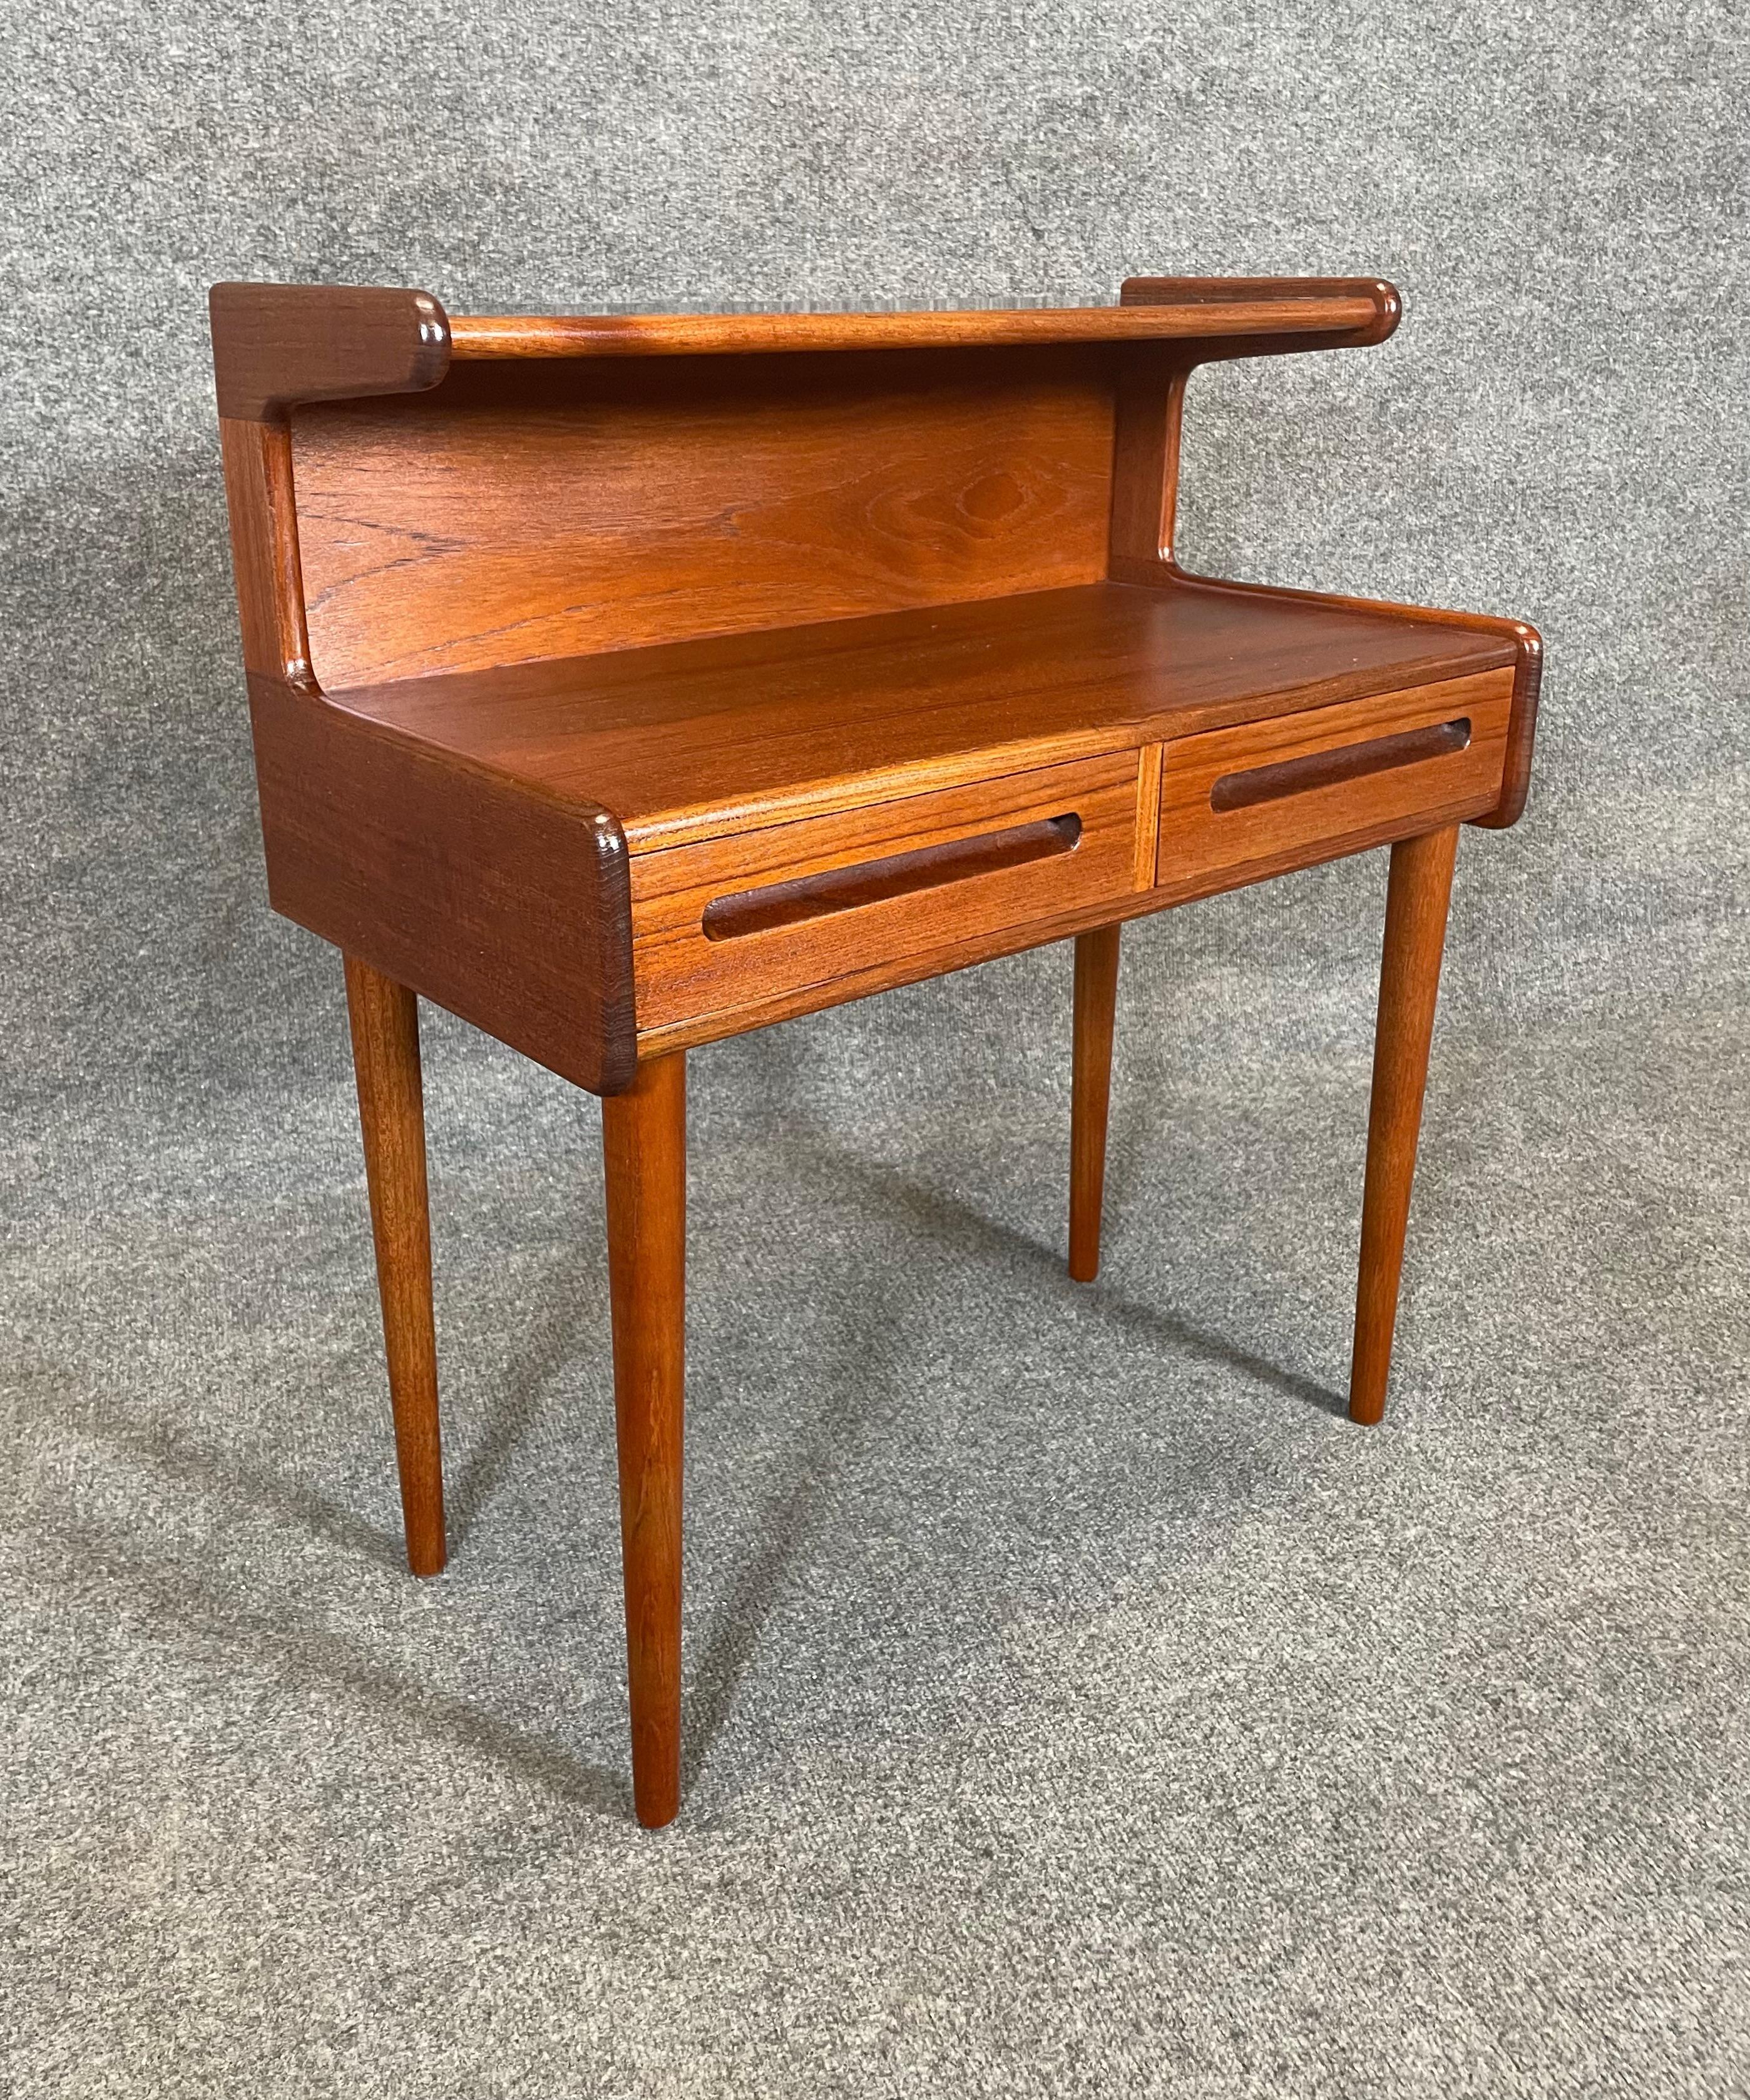 Vintage Danish Mid Century Modern Teak Side Table - Entry Chest In Good Condition For Sale In San Marcos, CA